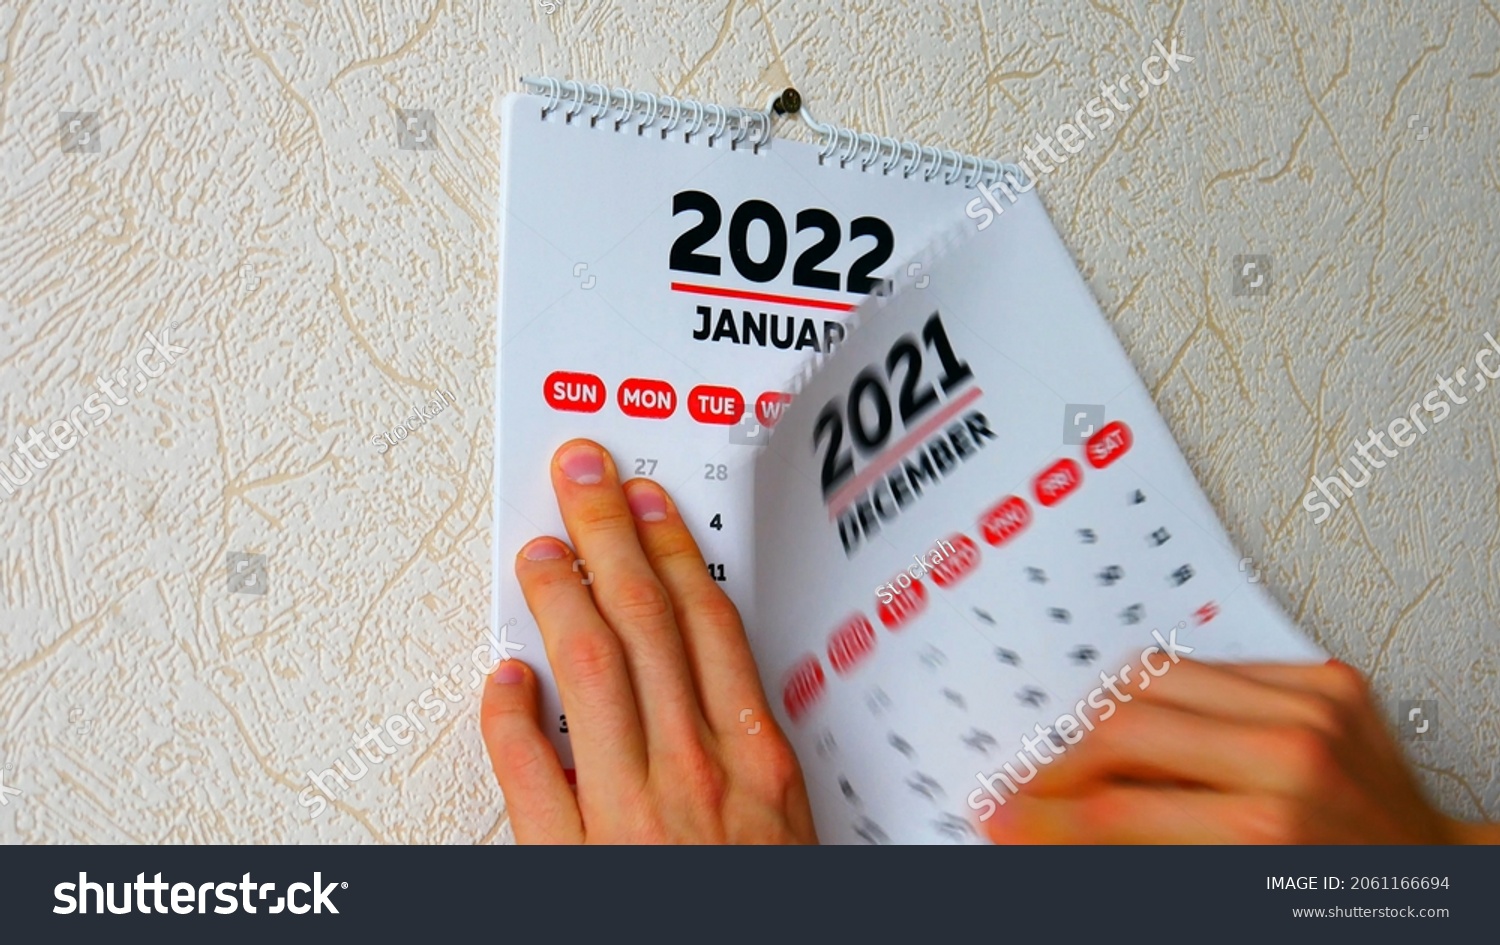 Close-up of a man's hands tearing off the December page of a 2021 calendar on the wall followed by the January page of a new 2022 calendar #2061166694